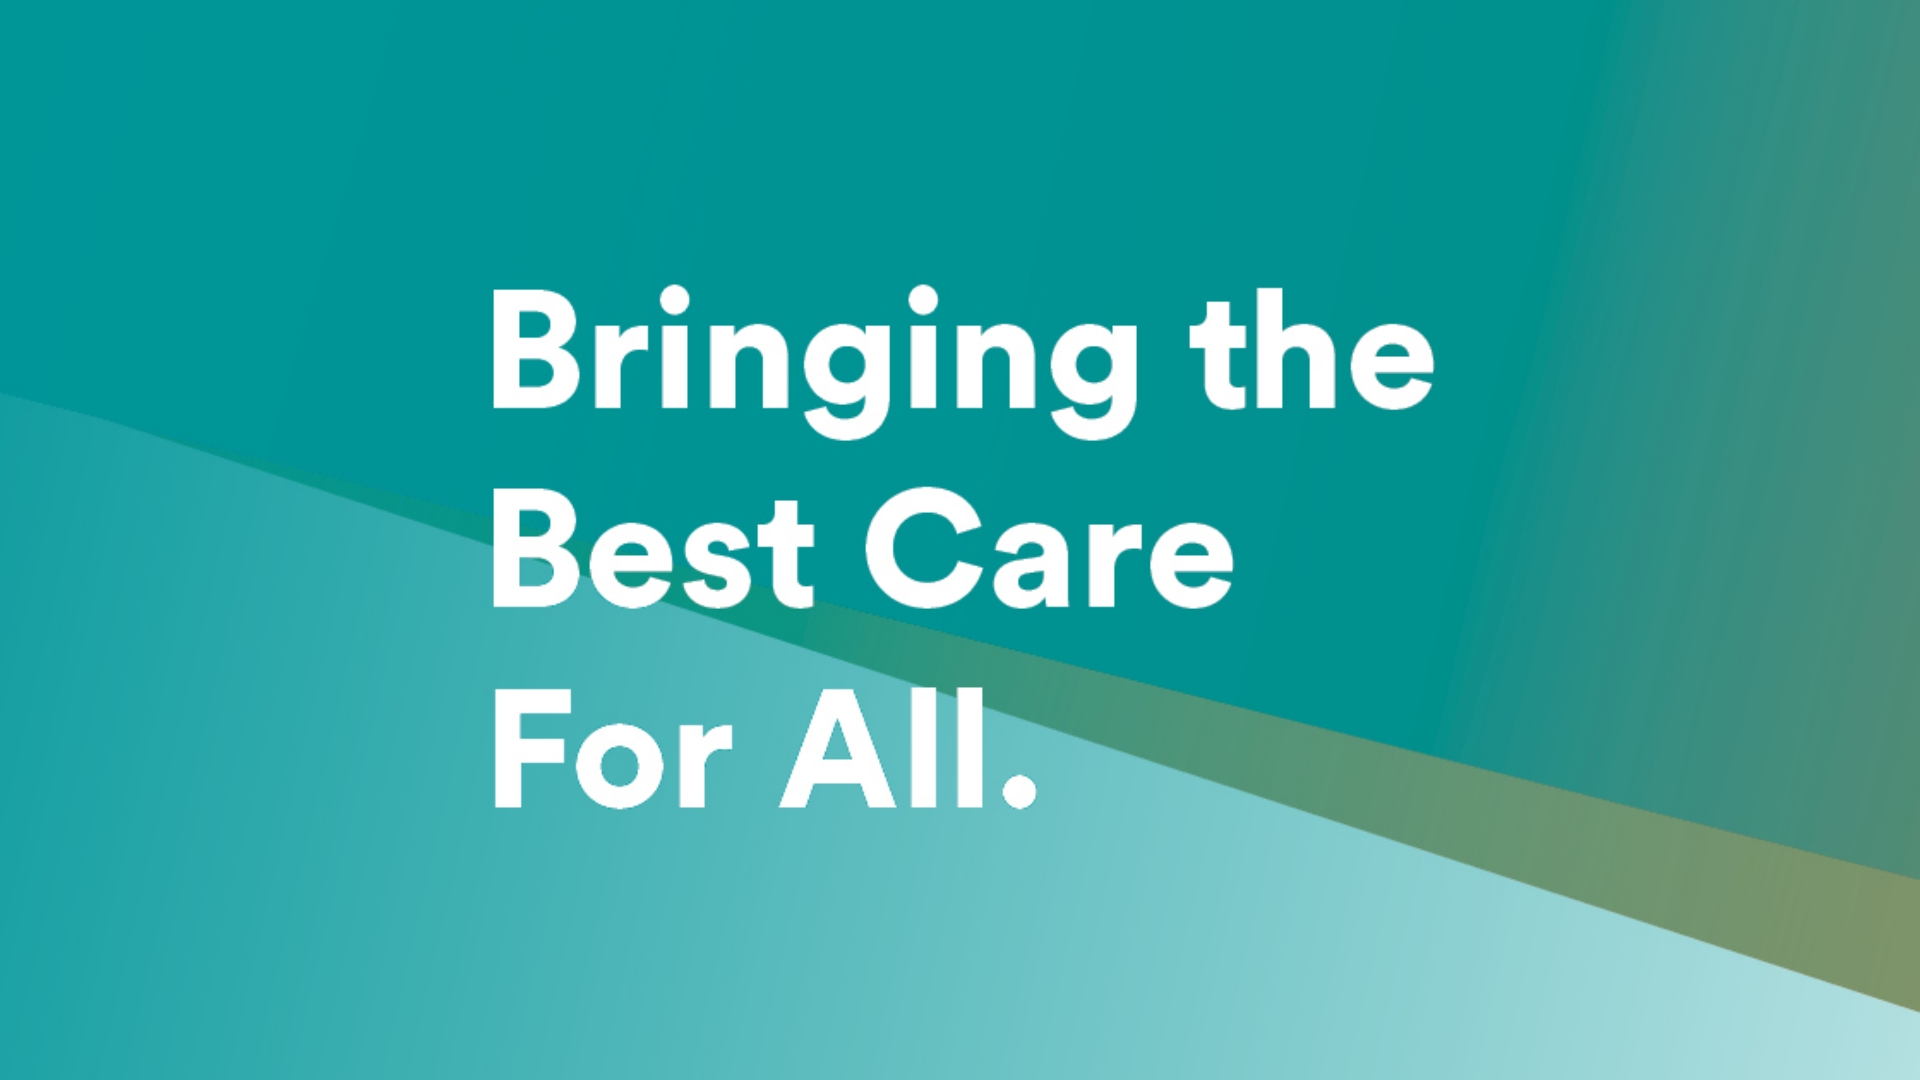 Atrium Health and Wake Forest Partner to Provide the Best Care for All